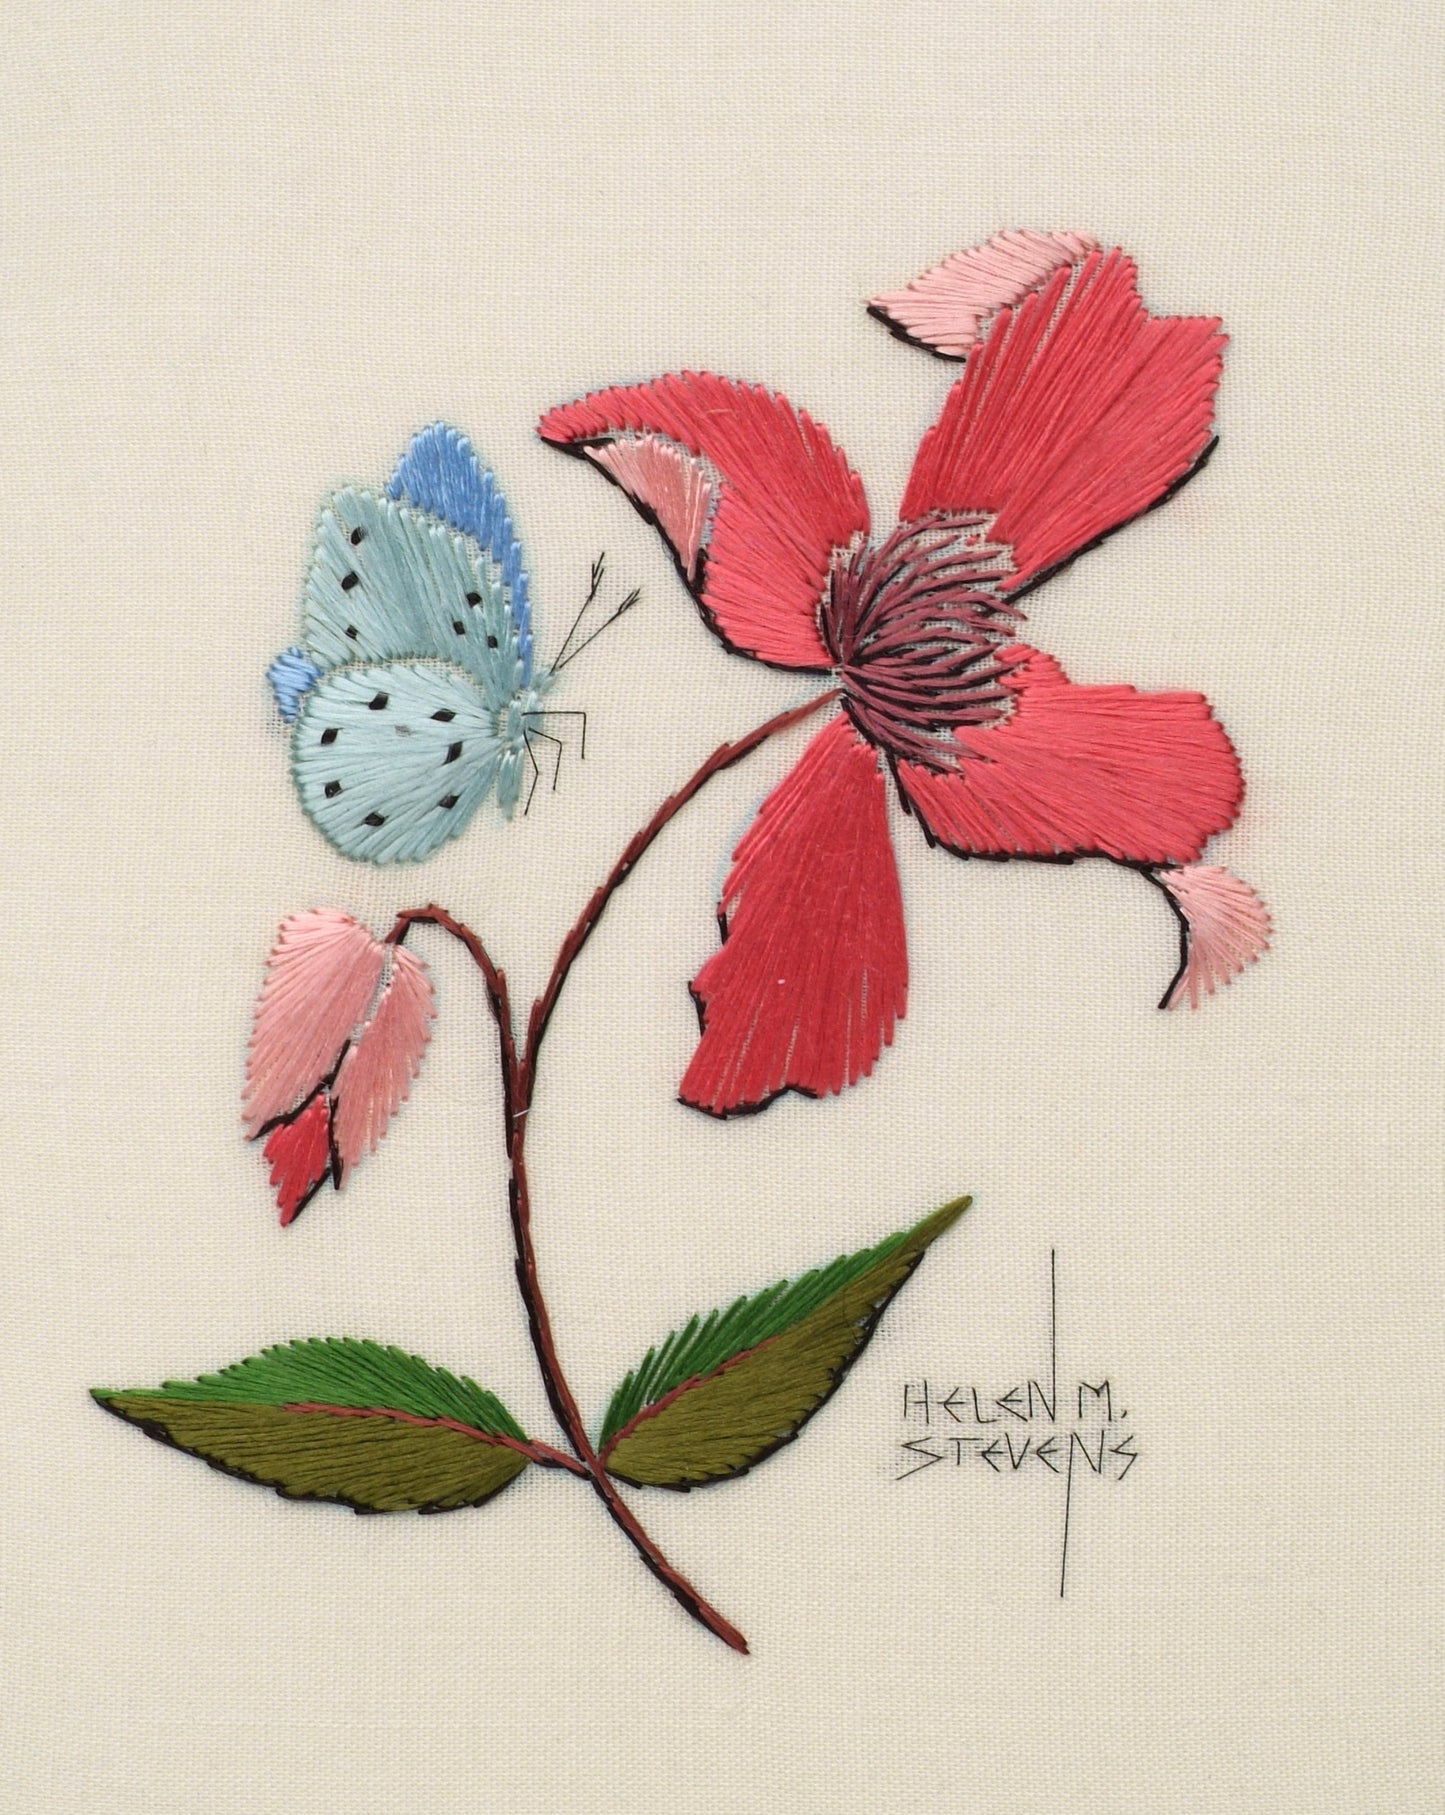 One Simple Stitch by Helen M Stevens